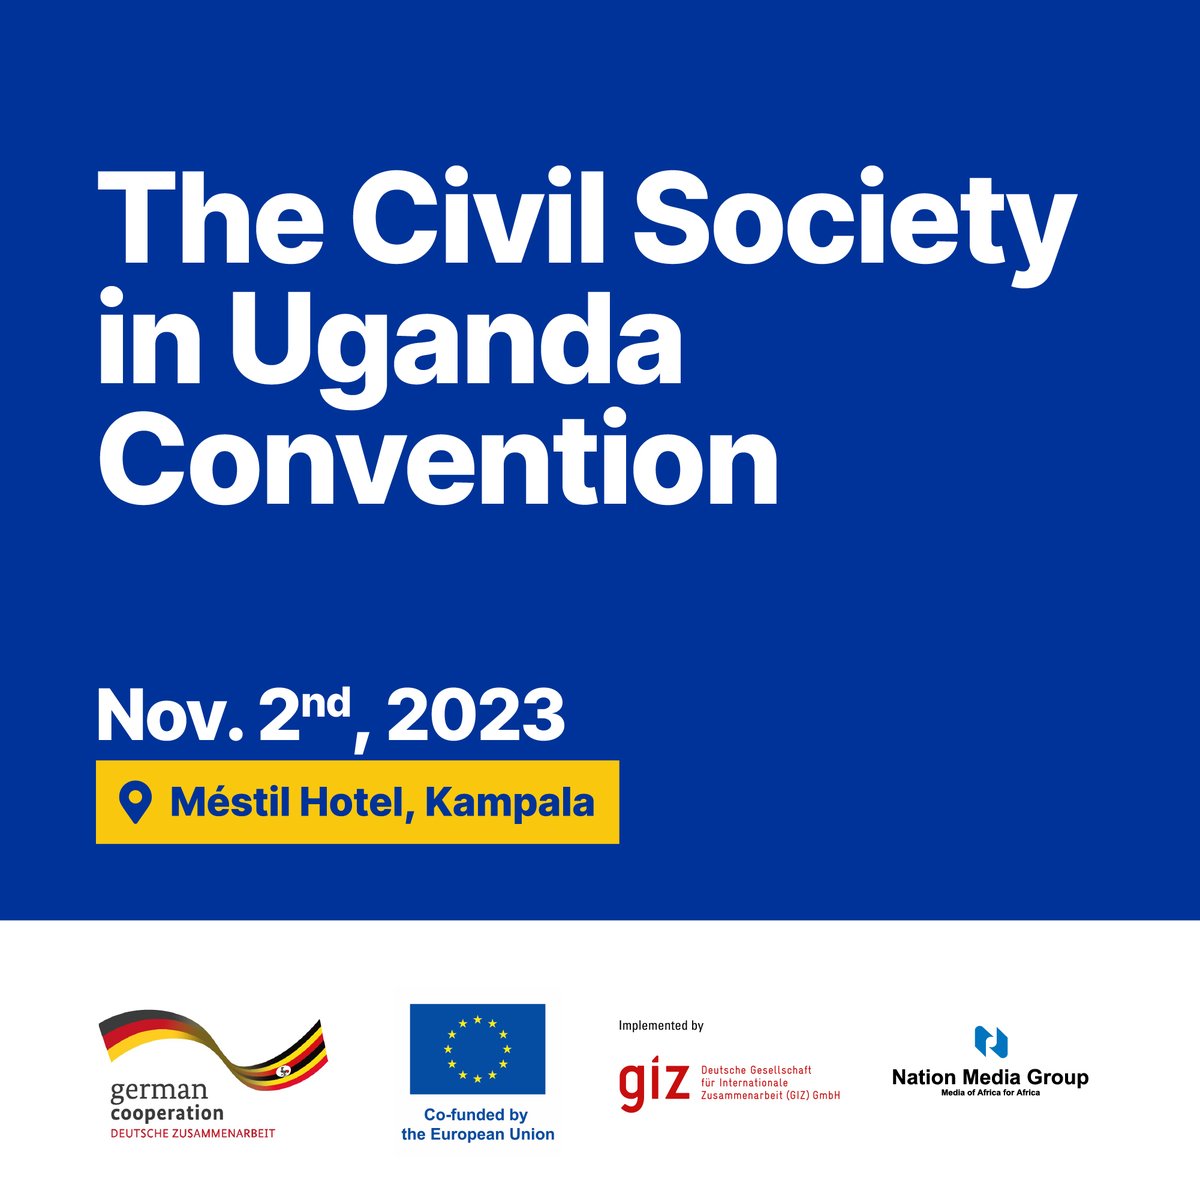 Today we  managed to be part of the #CSOConvention2023 where different civil society Organizations displayed there services and attended different sessions organized we are grateful for this opportunity @giz_uganda @NationMediaGrp